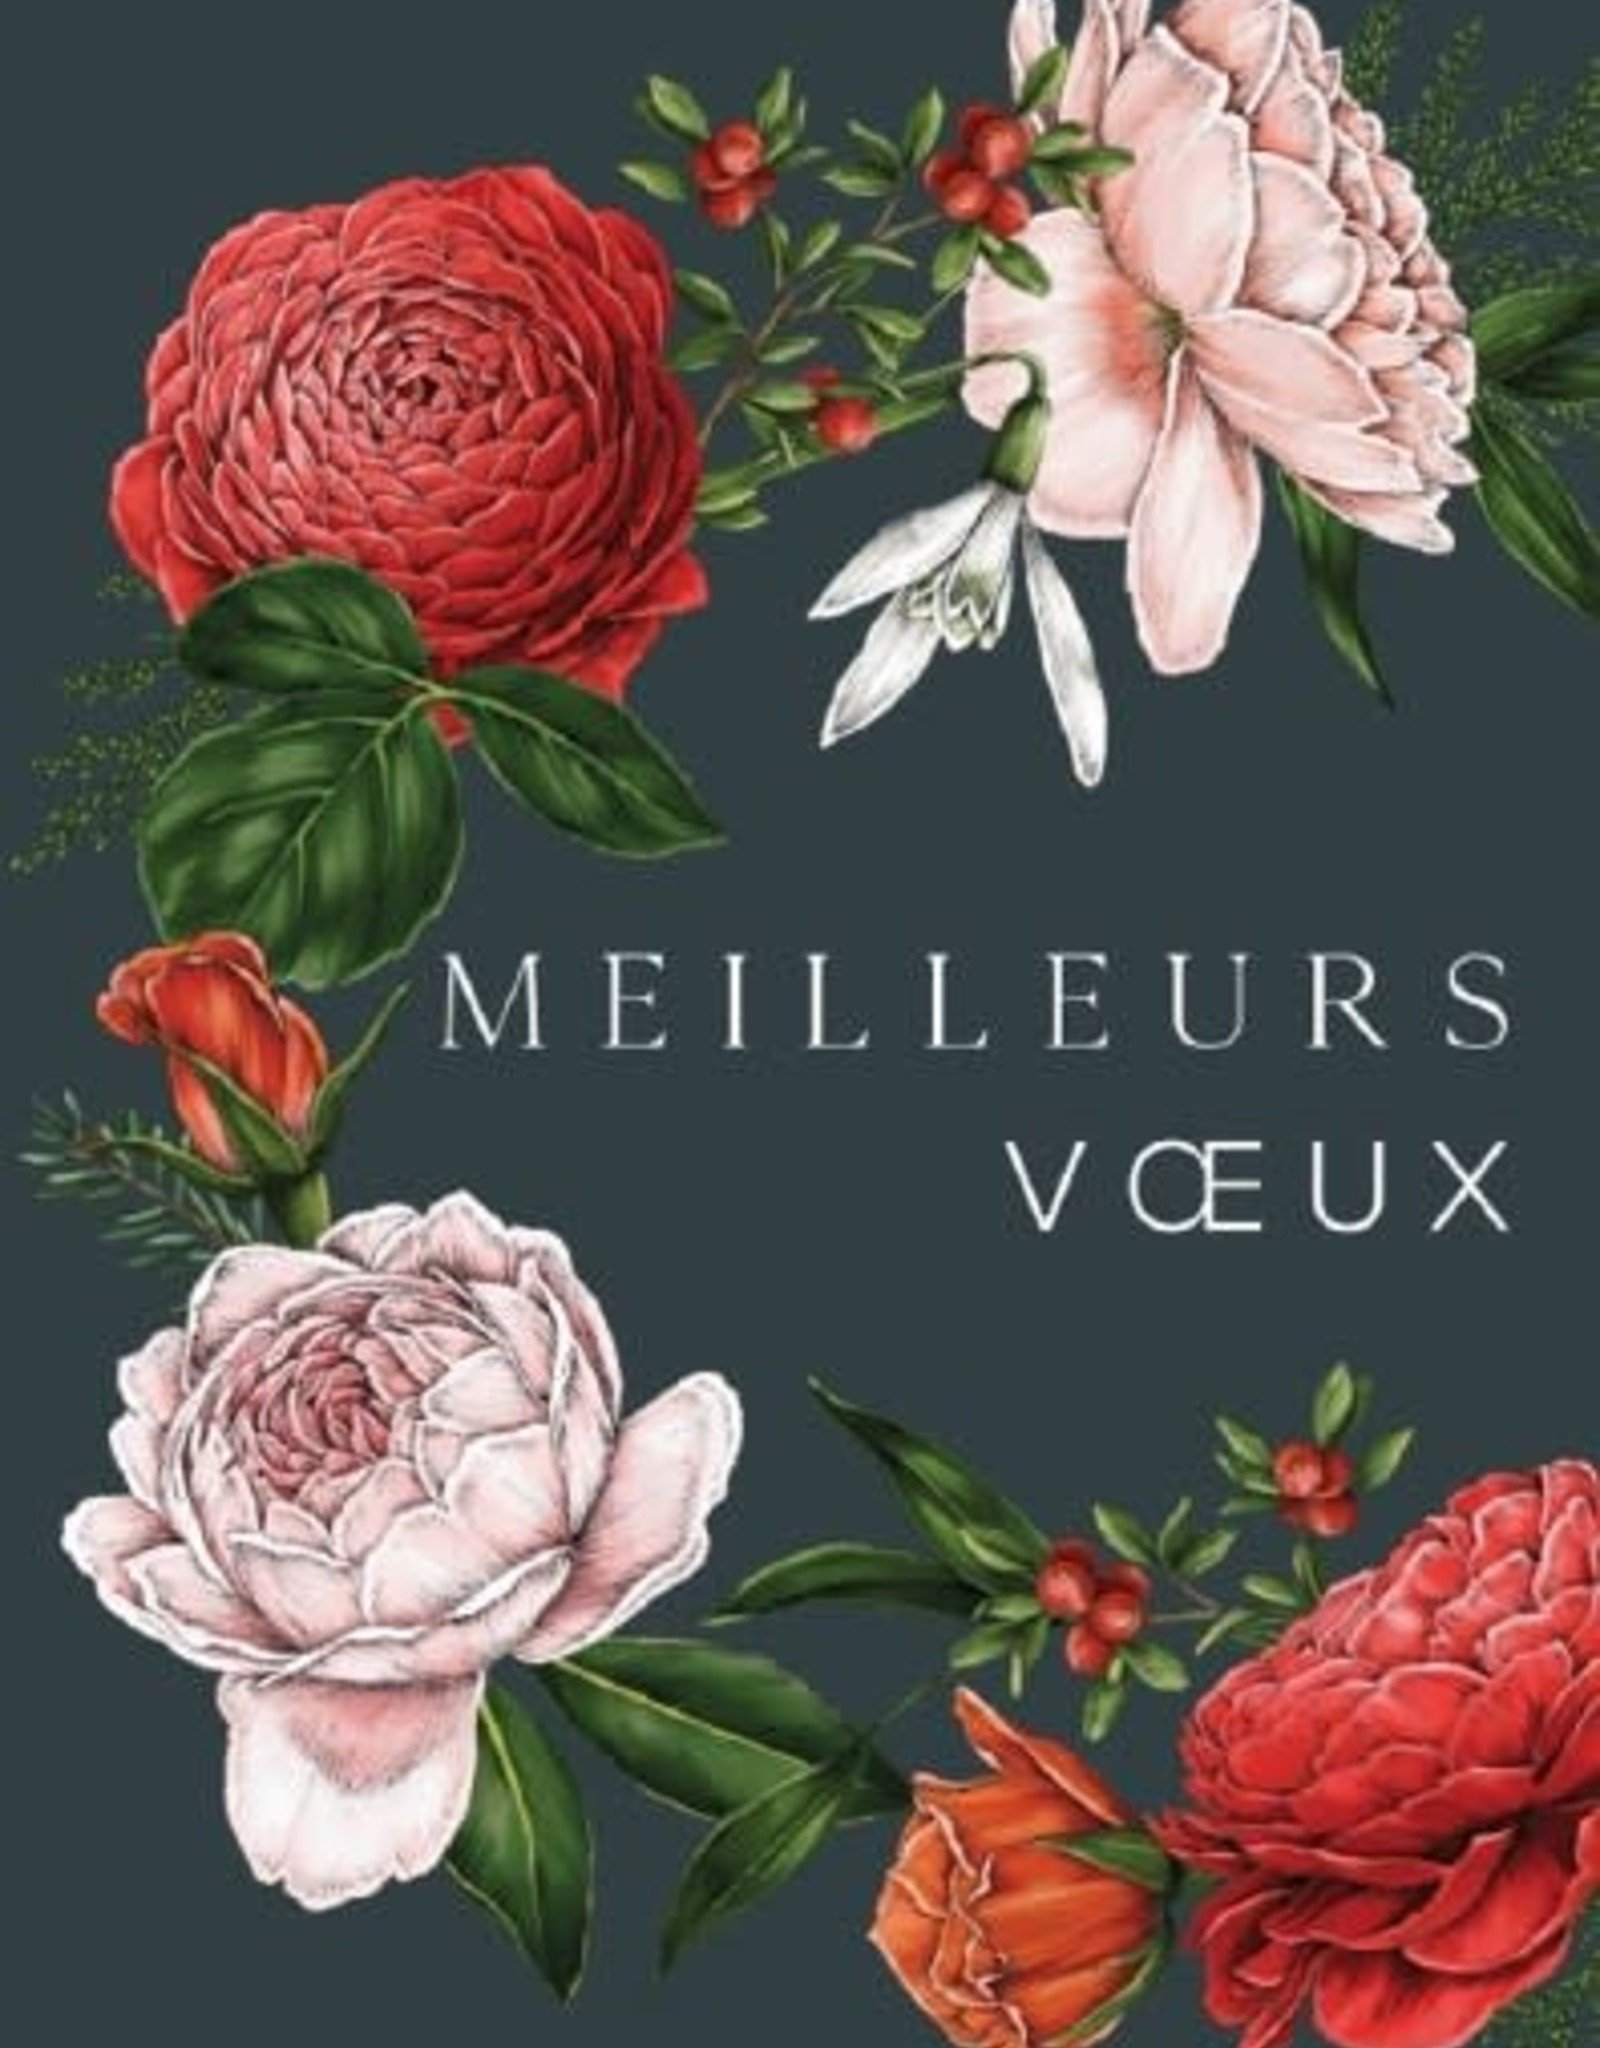 Meilleurs Voeux Best Wishes Greeting Card Made In France European Splendor